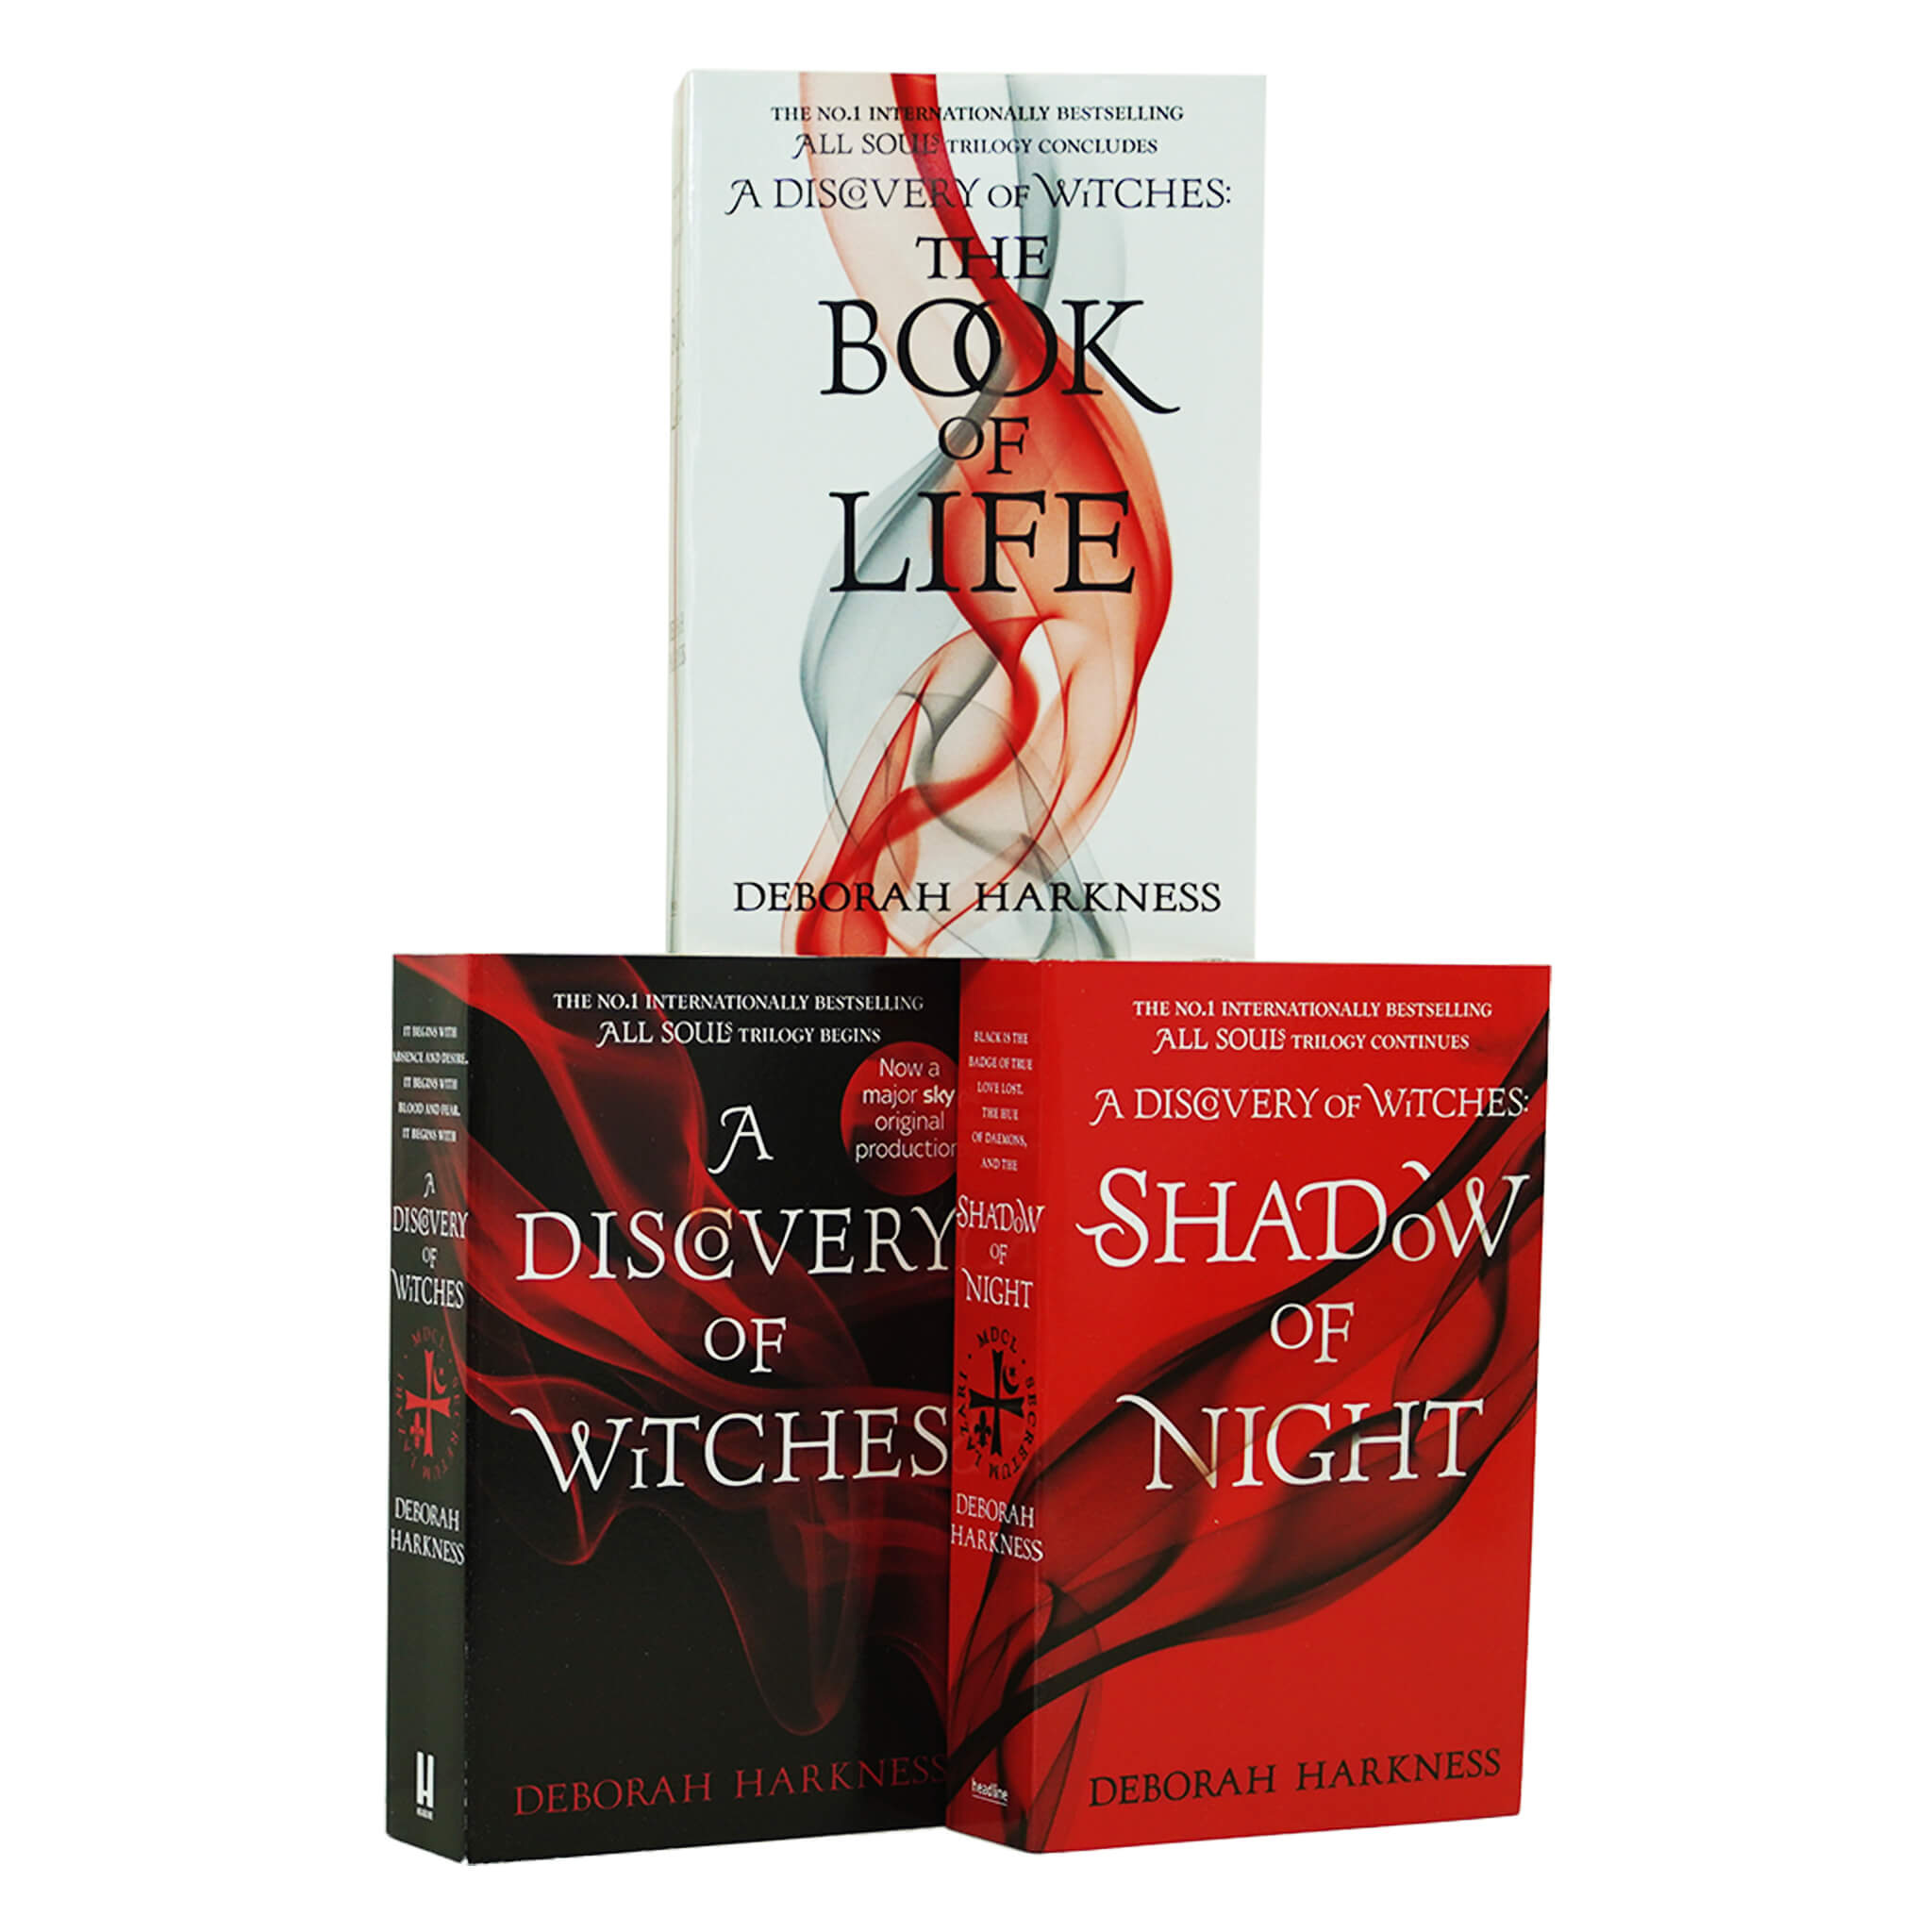 The All Souls Trilogy 3 Books Collection Set by Deborah Harkness - Fiction - Paperback